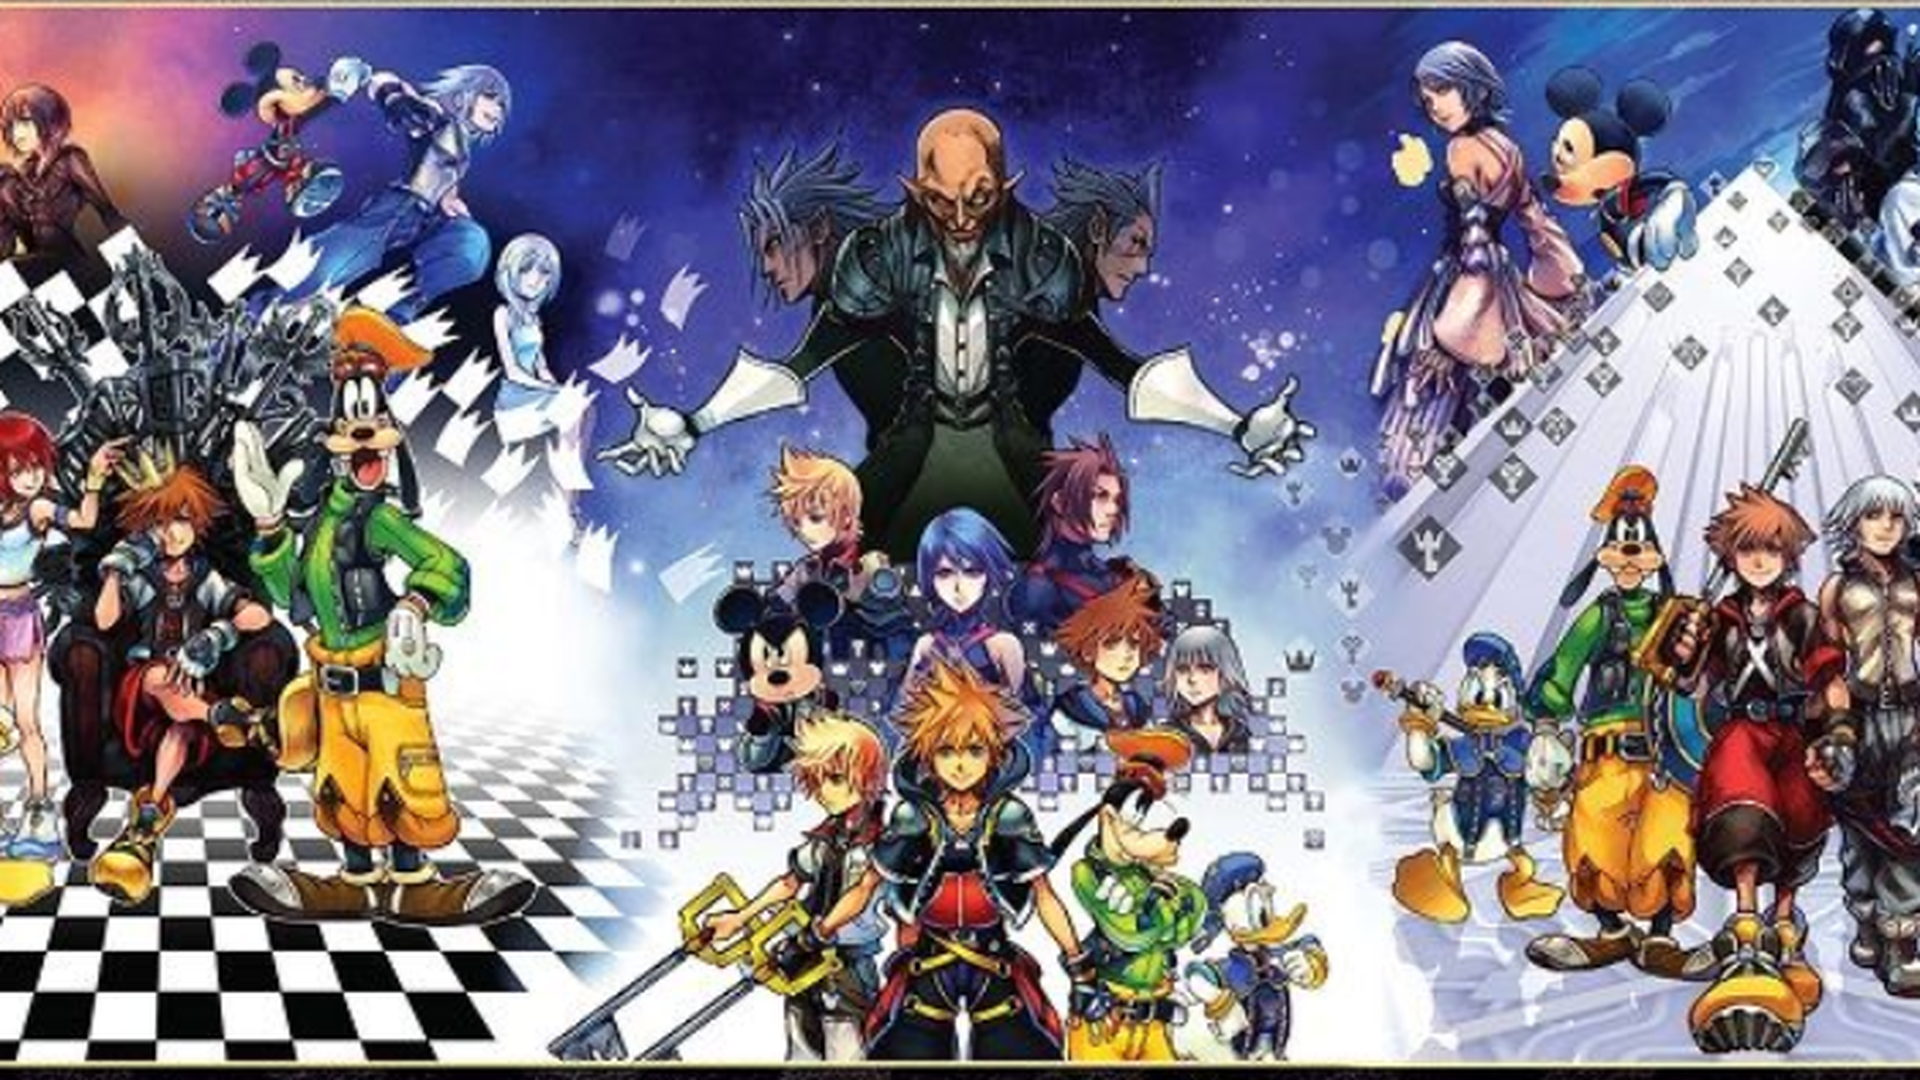 Kingdom Hearts: The Story So Far confirmed for PS4